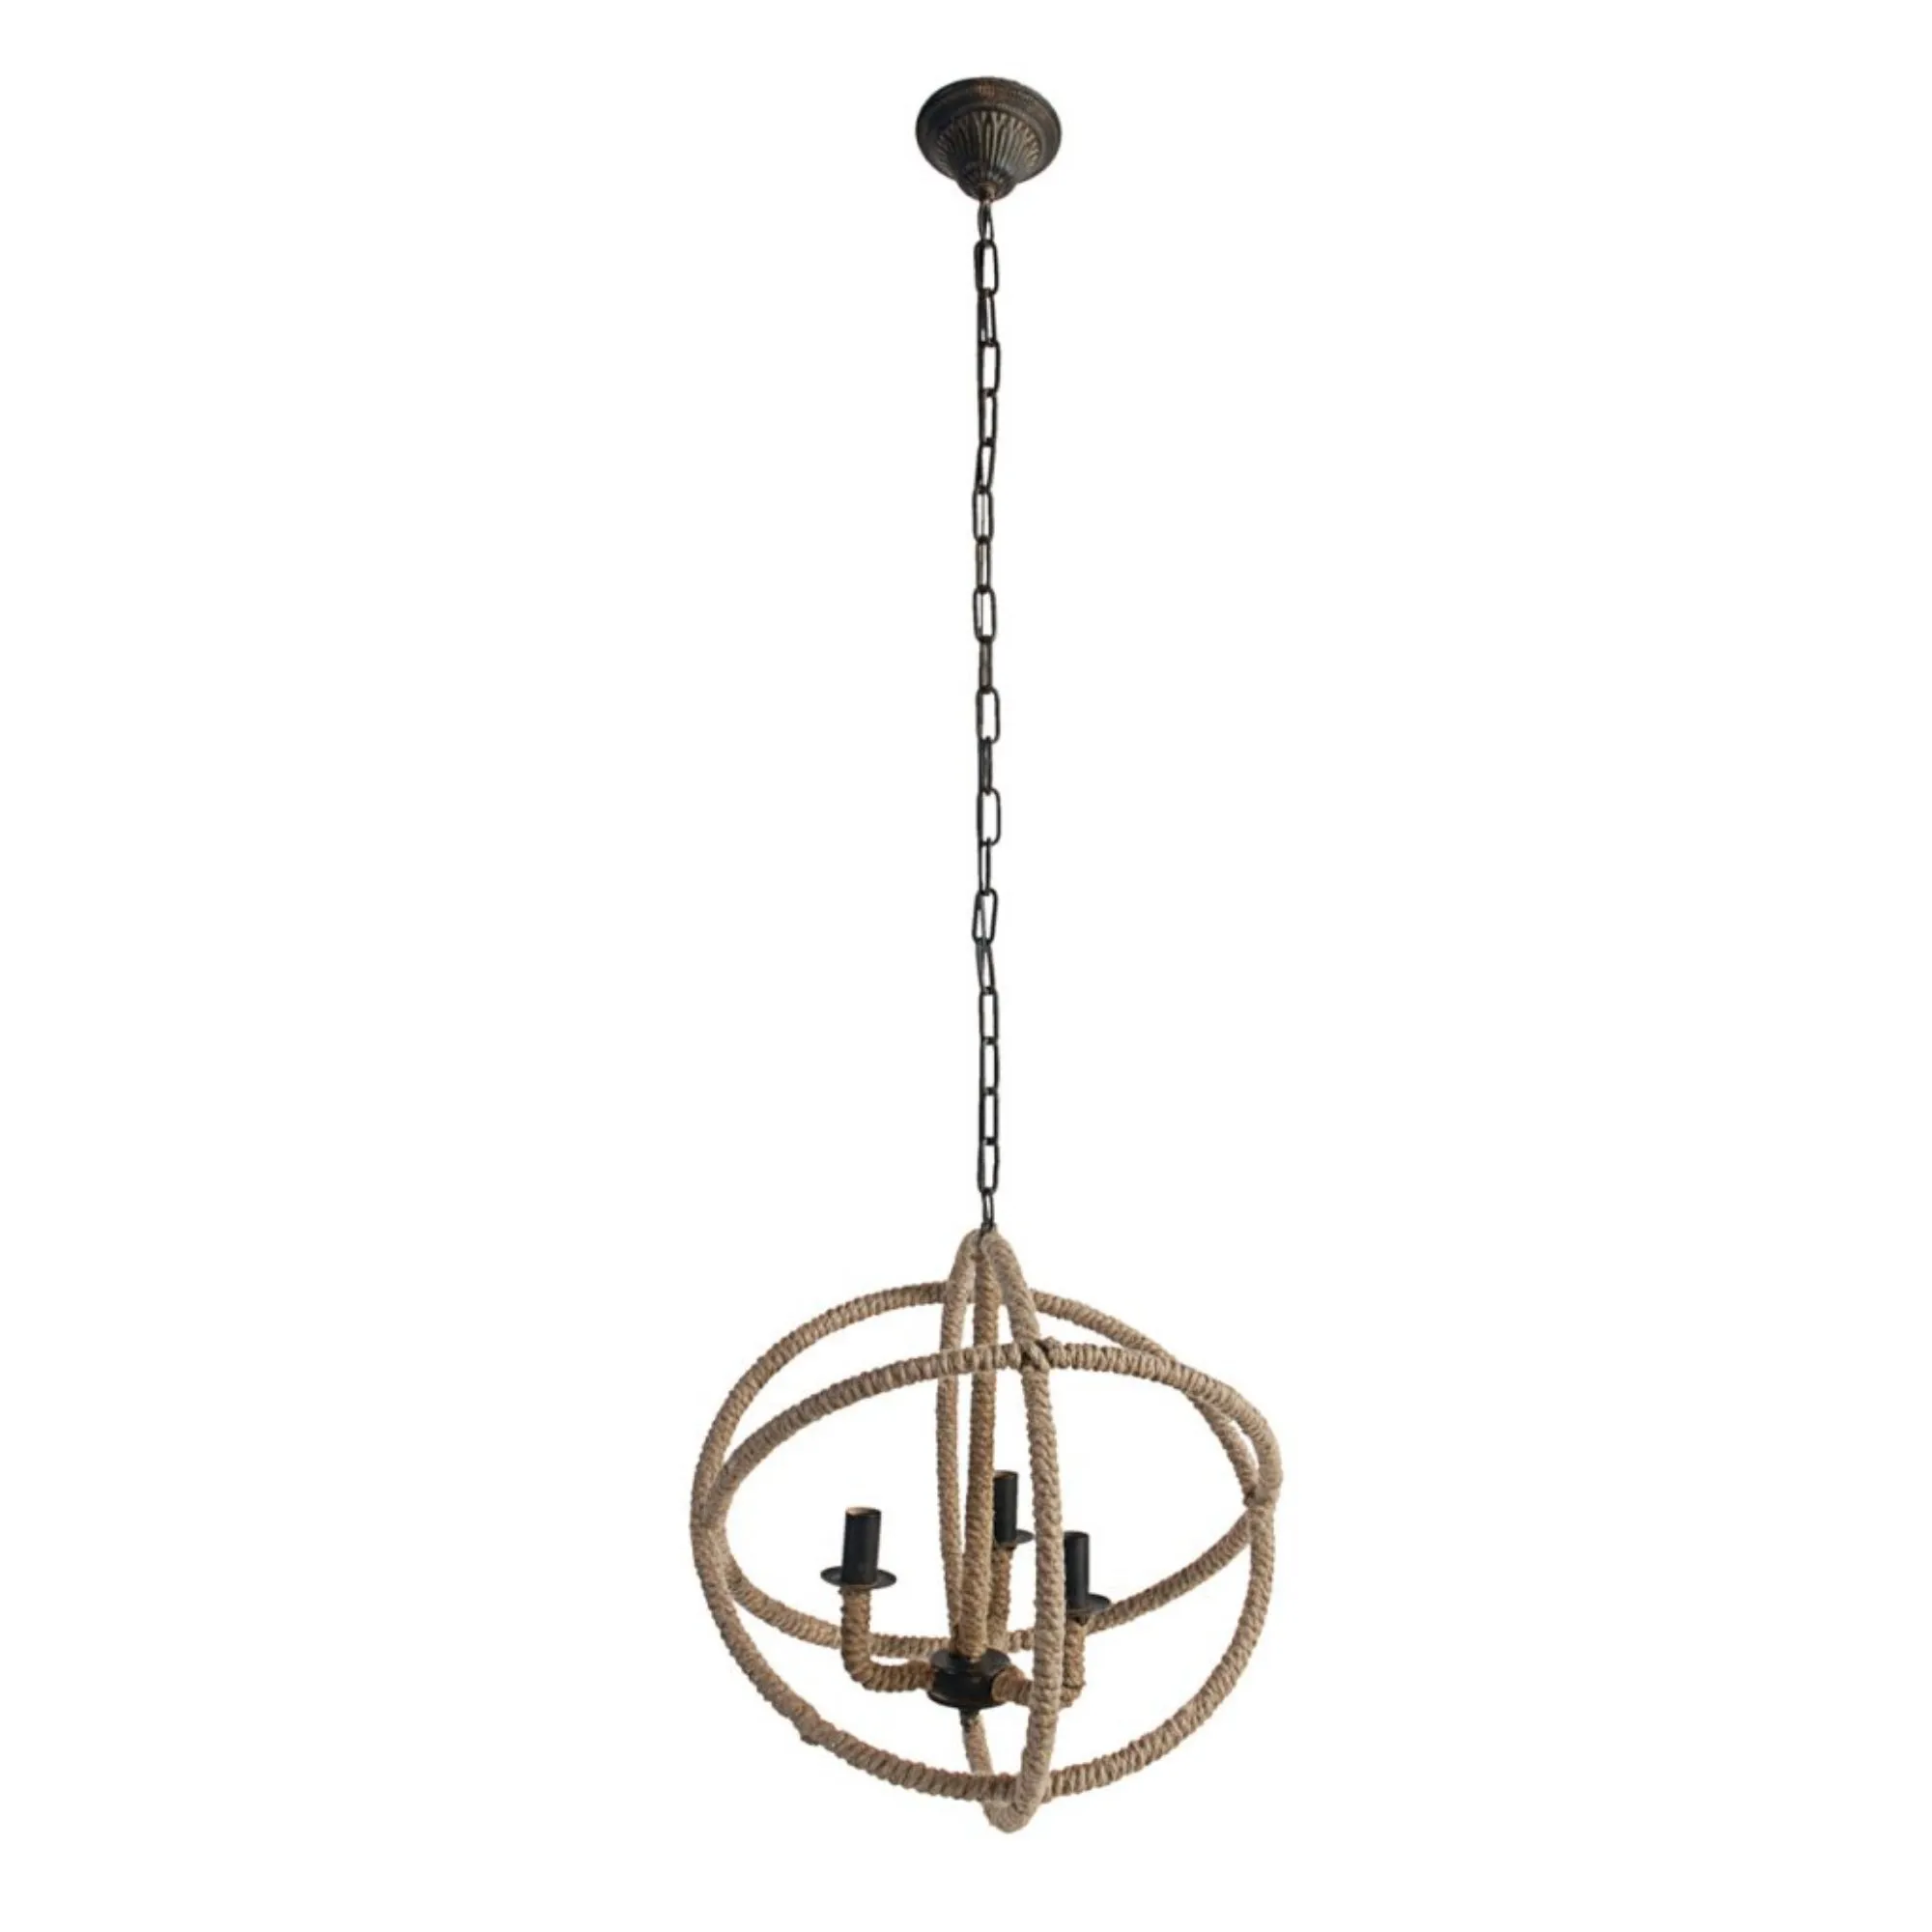 20.75" Brown and Black Cottage Style Three-Light Roped Chandelier